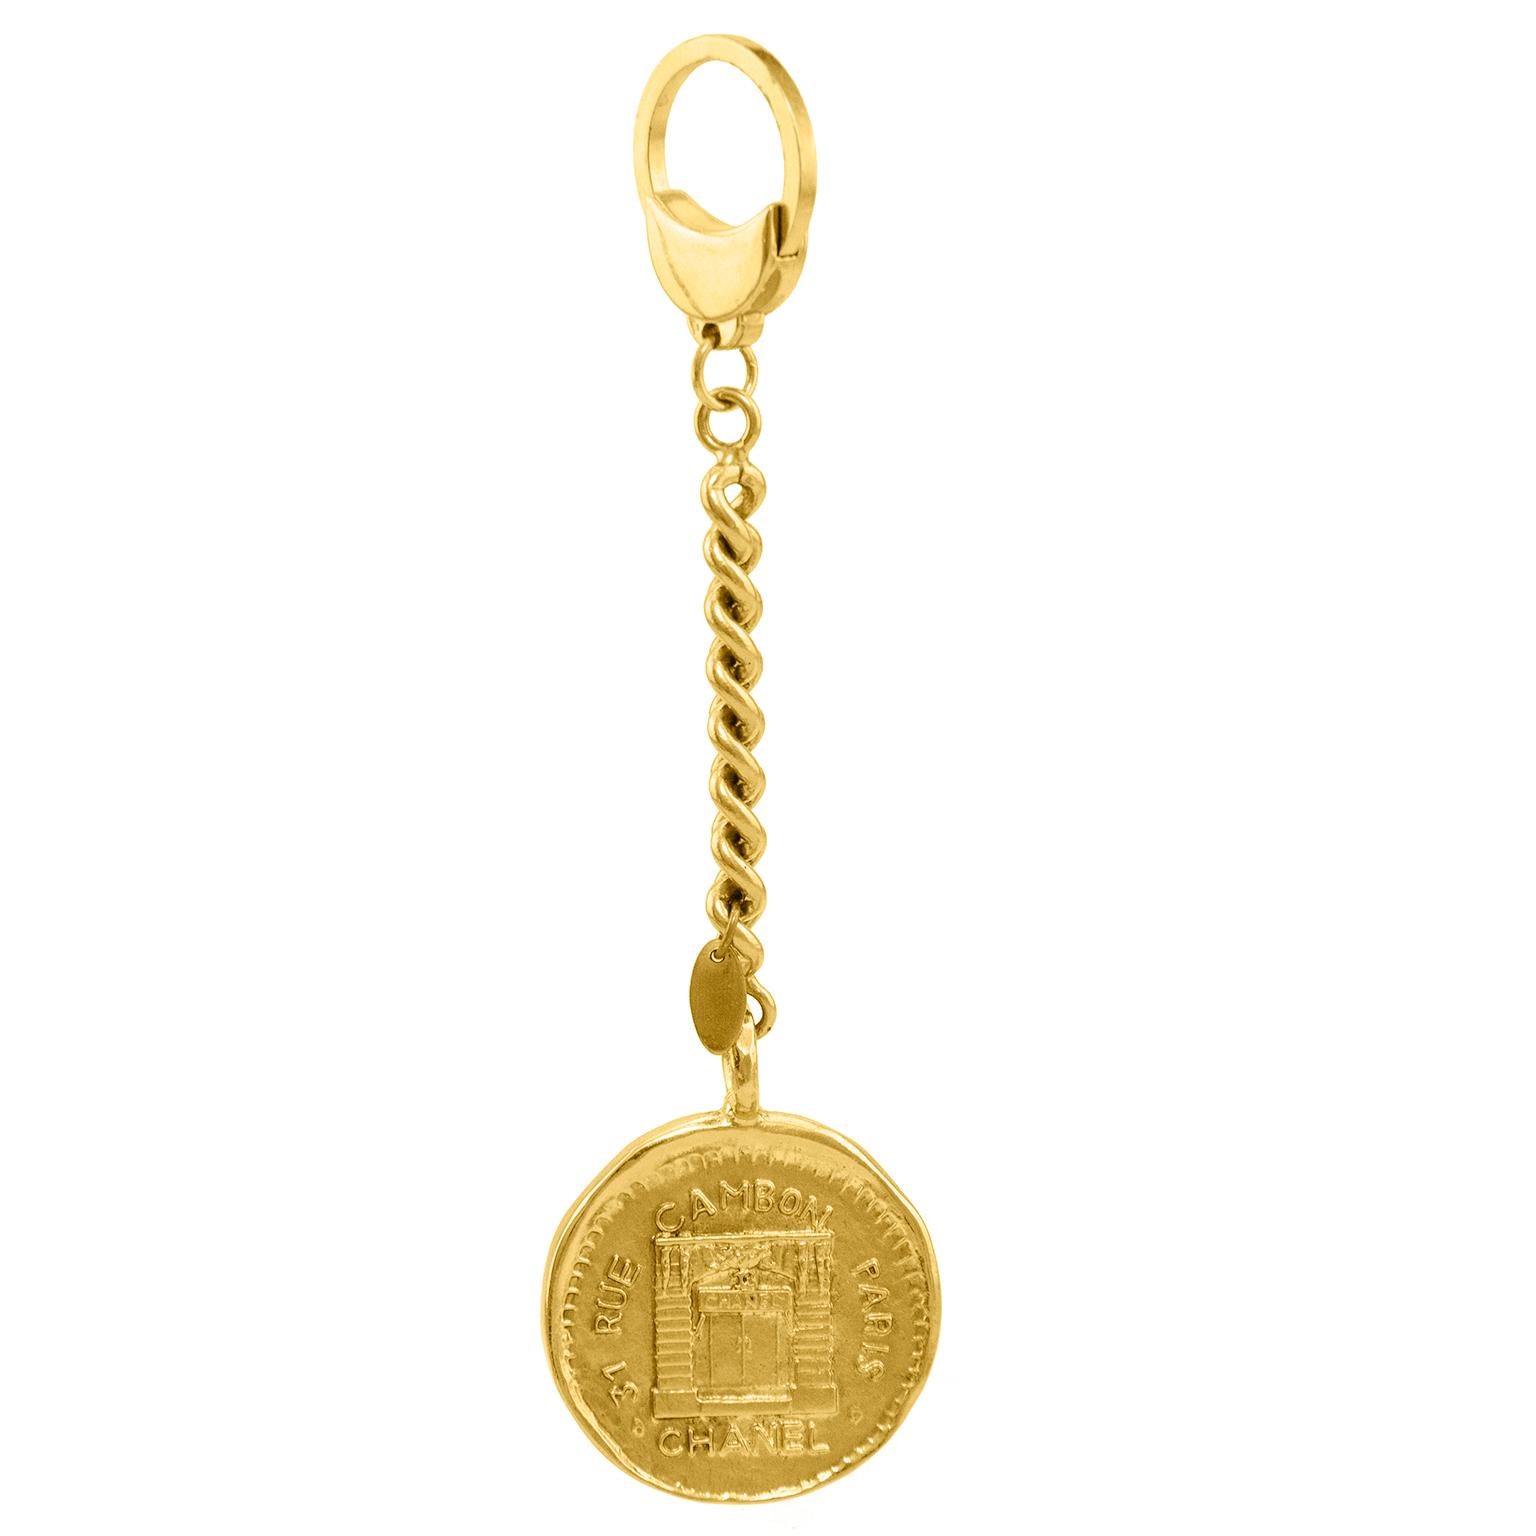 Chanel keychain dated from collection 23. The goldtone coin is stamped with the iconic Rue Cambon address and image. Rounded chainlink connects the coin to the key ring. In excellent condition.  No original box.